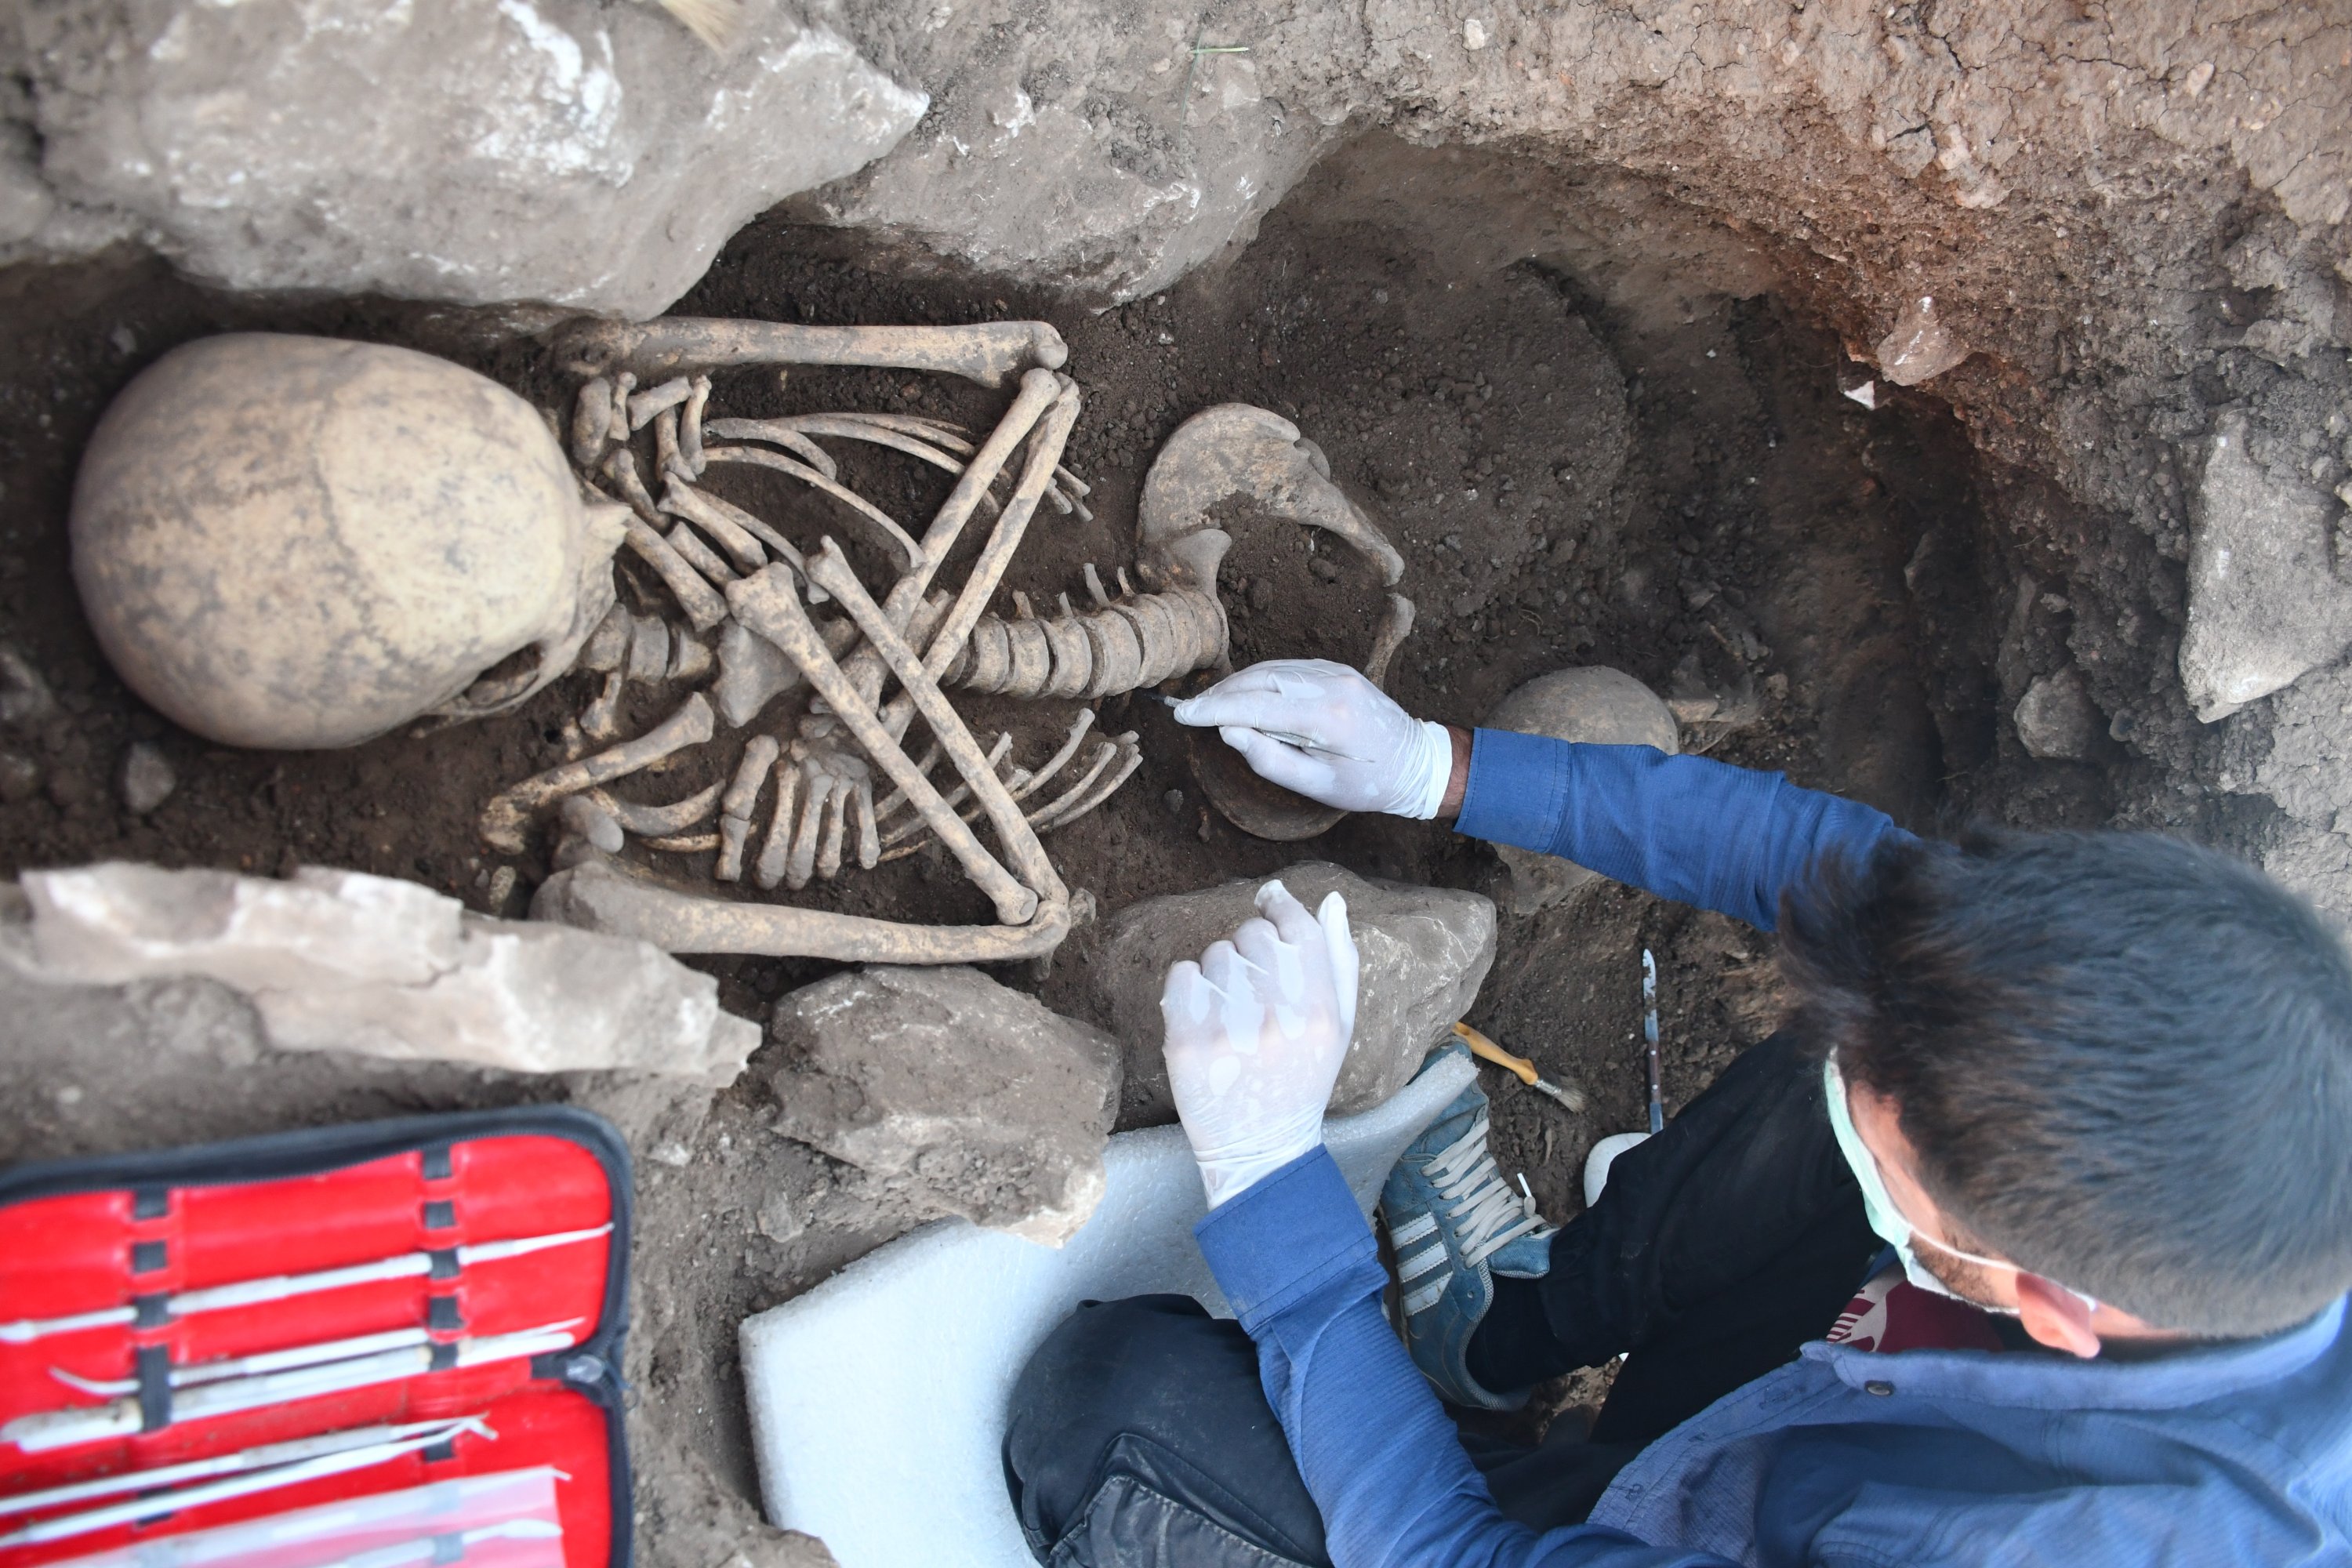 An archaeologist works on a skeleton found at the mounds of Ambar, Kendale Hecala and Gre Fılla in Diyarbakır, eastern Turkey, Dec. 12, 2020. (AA PHOTO)